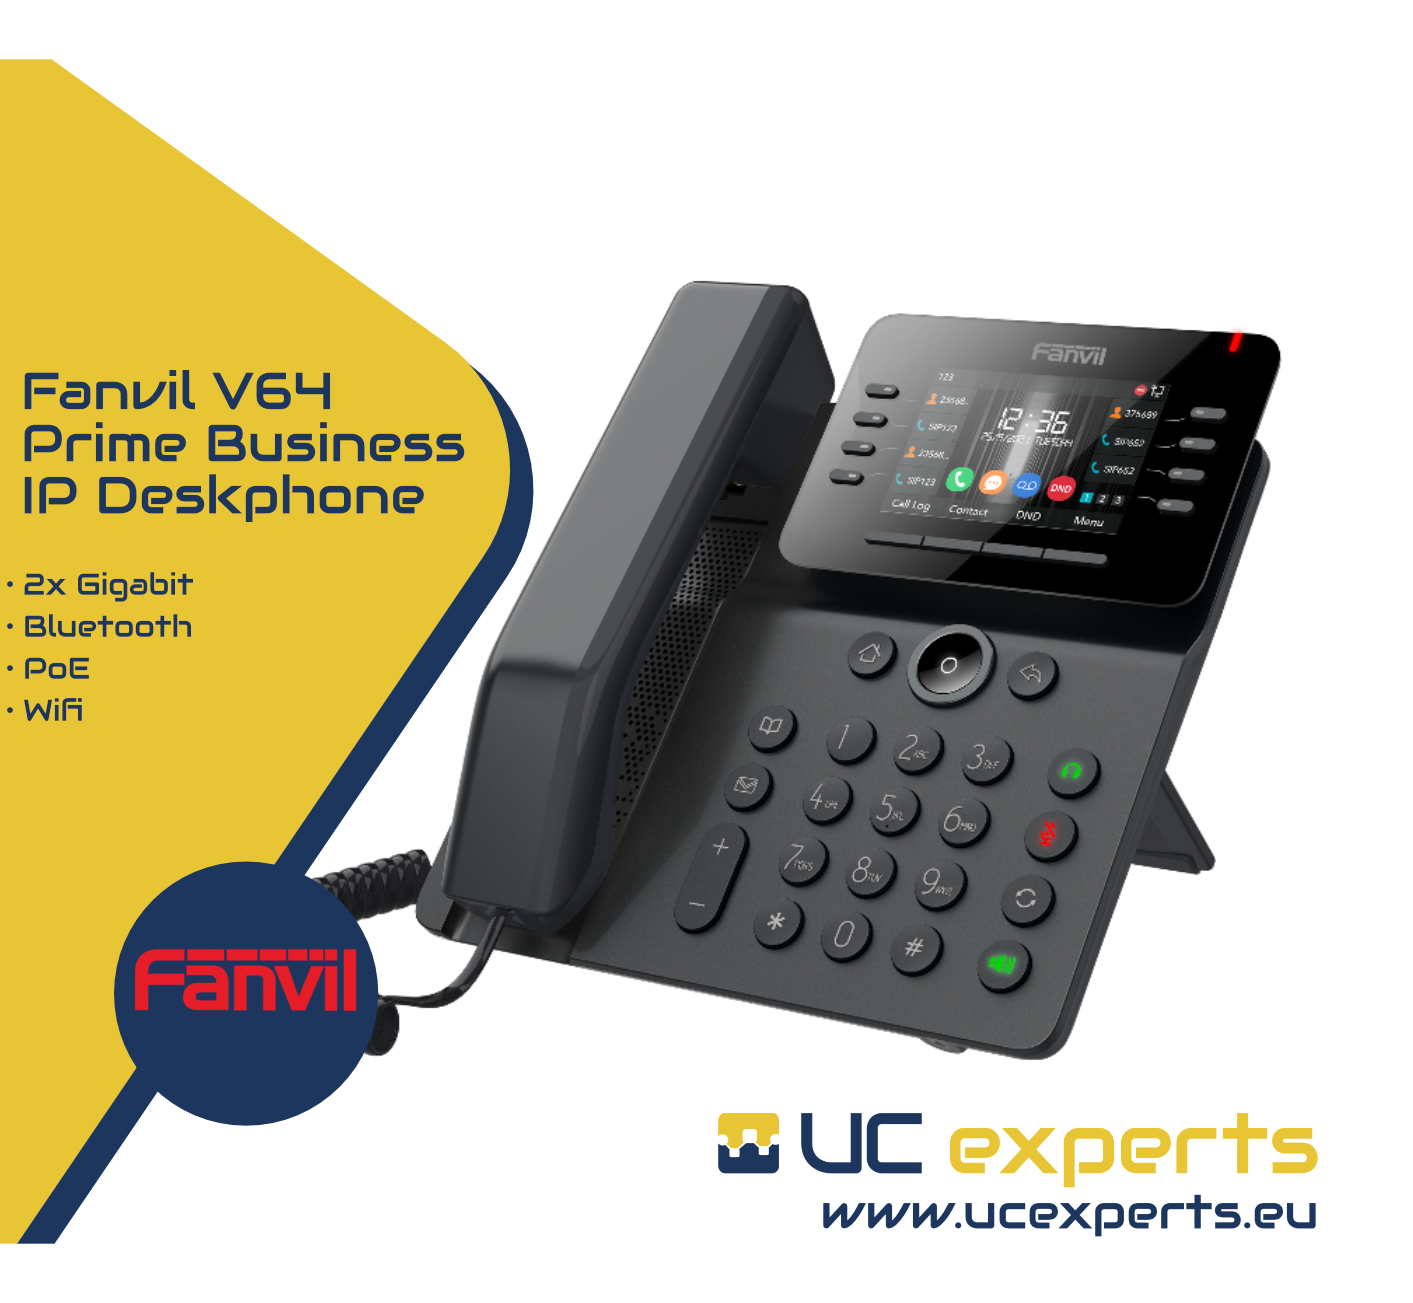 The Fanvil V64 is more than an efficient telephone, it